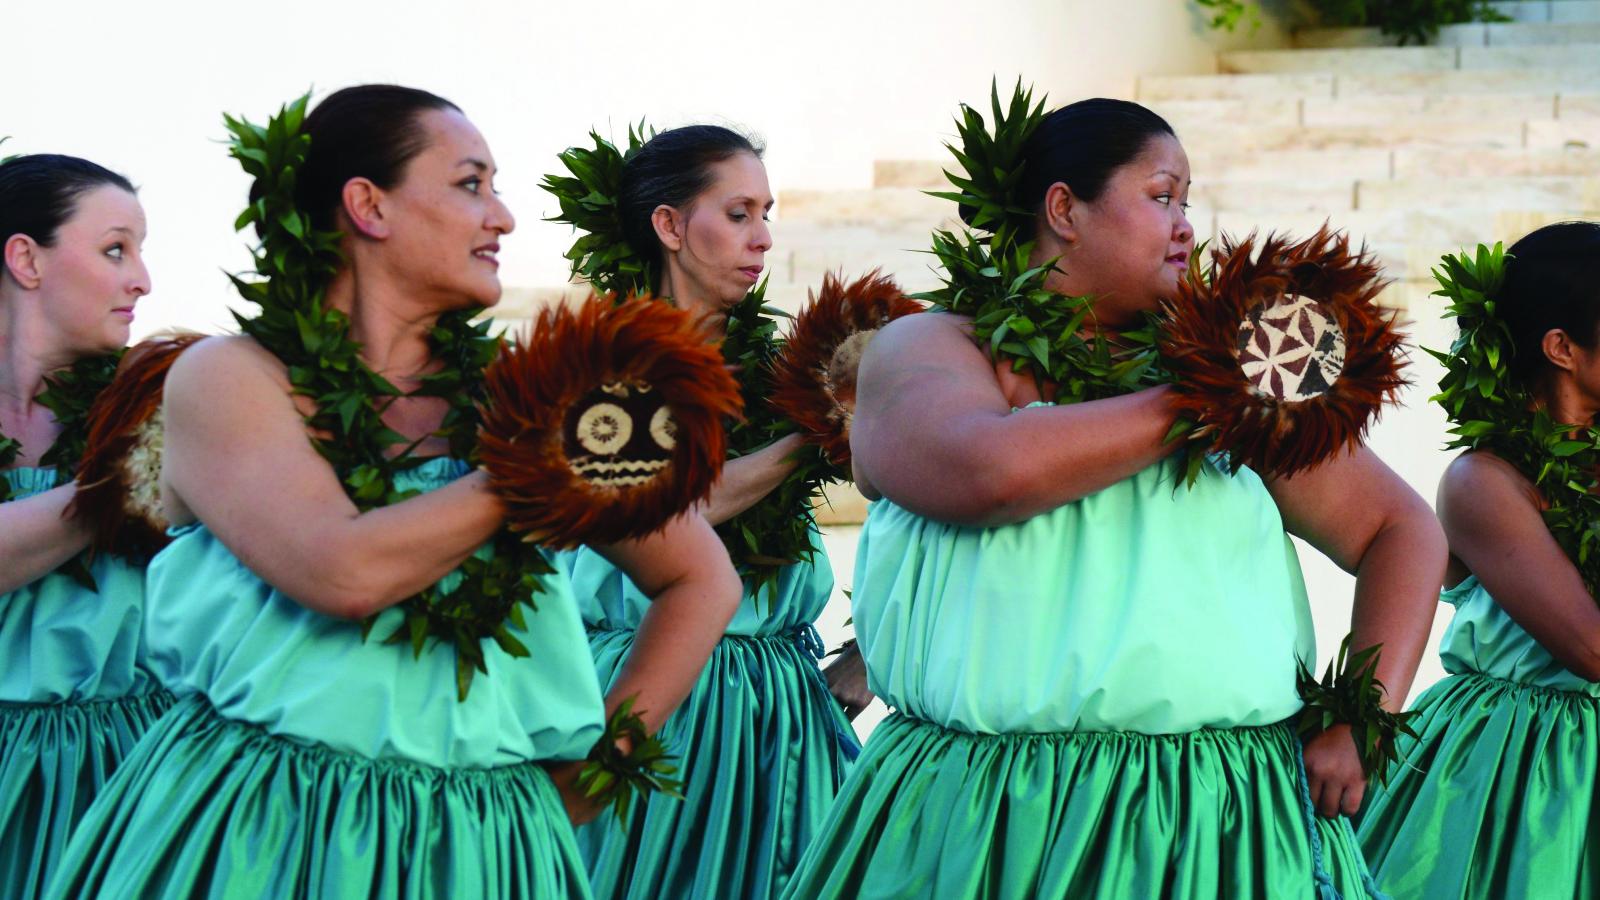 Women in blue dresses holding feathered gourds perform a traditional Hawaiian dance.